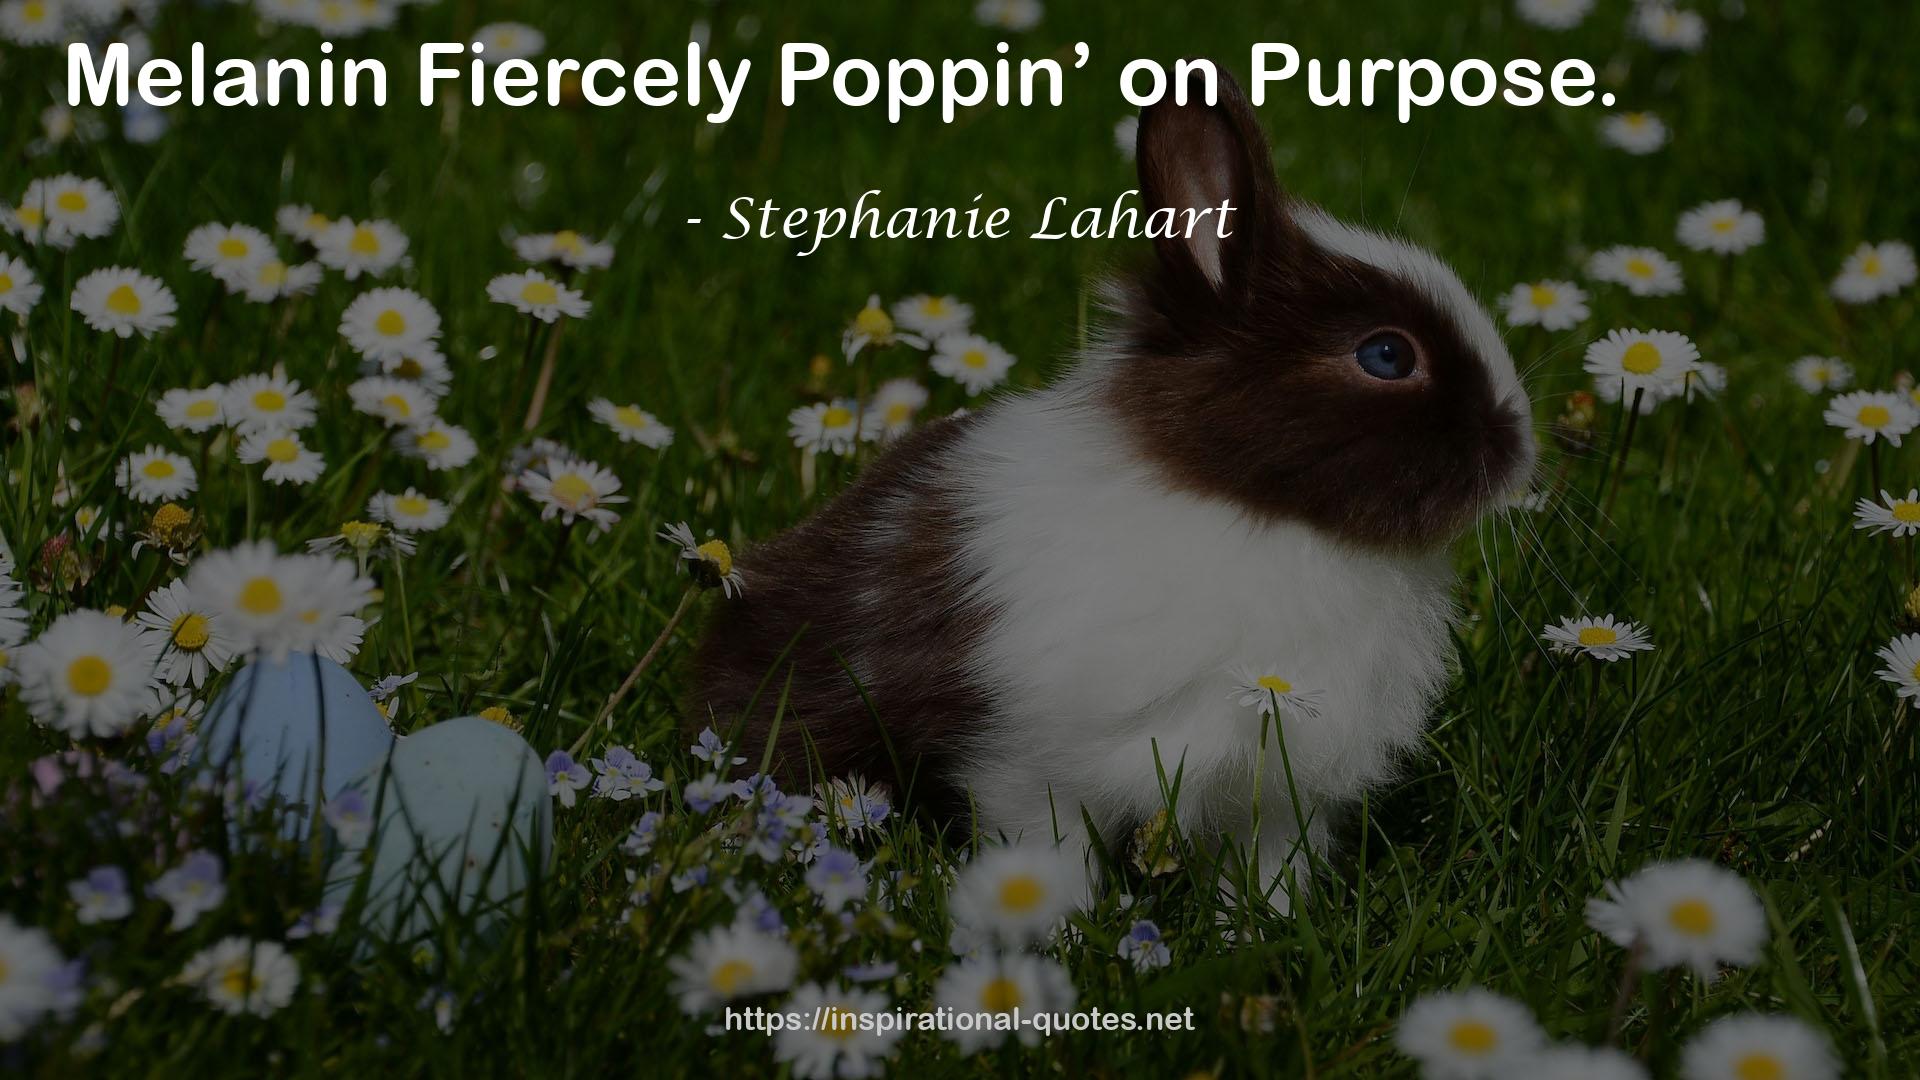 Stephanie Lahart quote : Melanin Fiercely Poppin’ on Purpose.